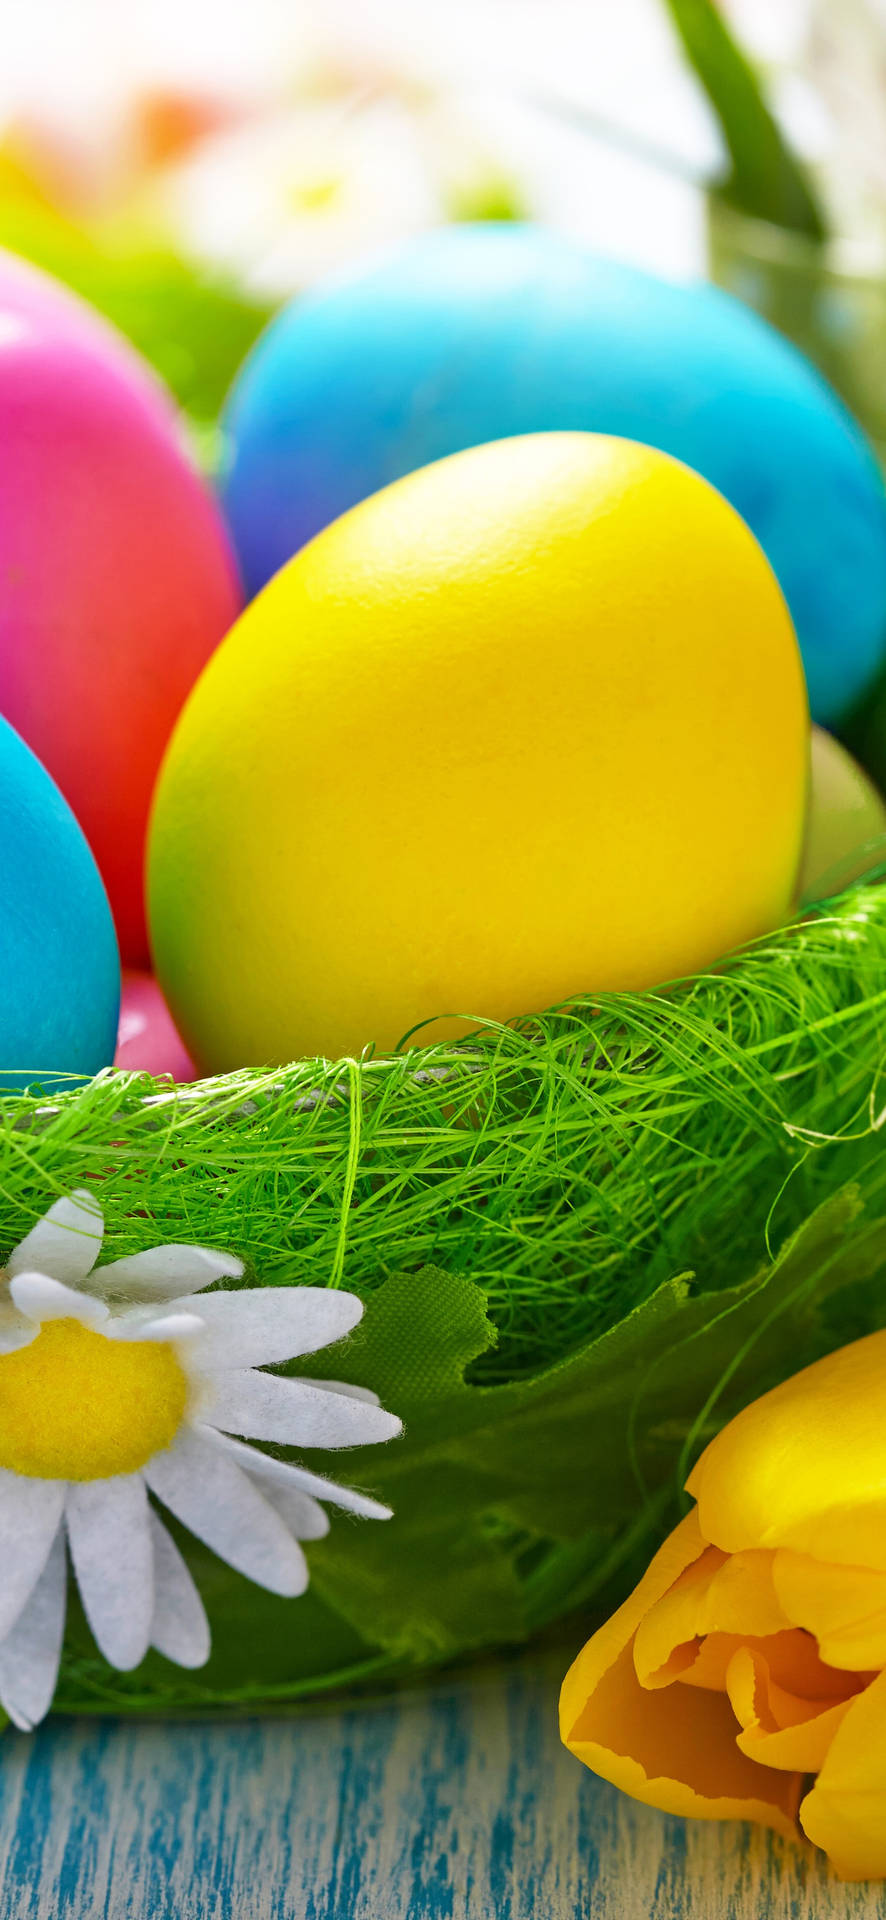 Welcome the Joy of Easter on your Phone Wallpaper